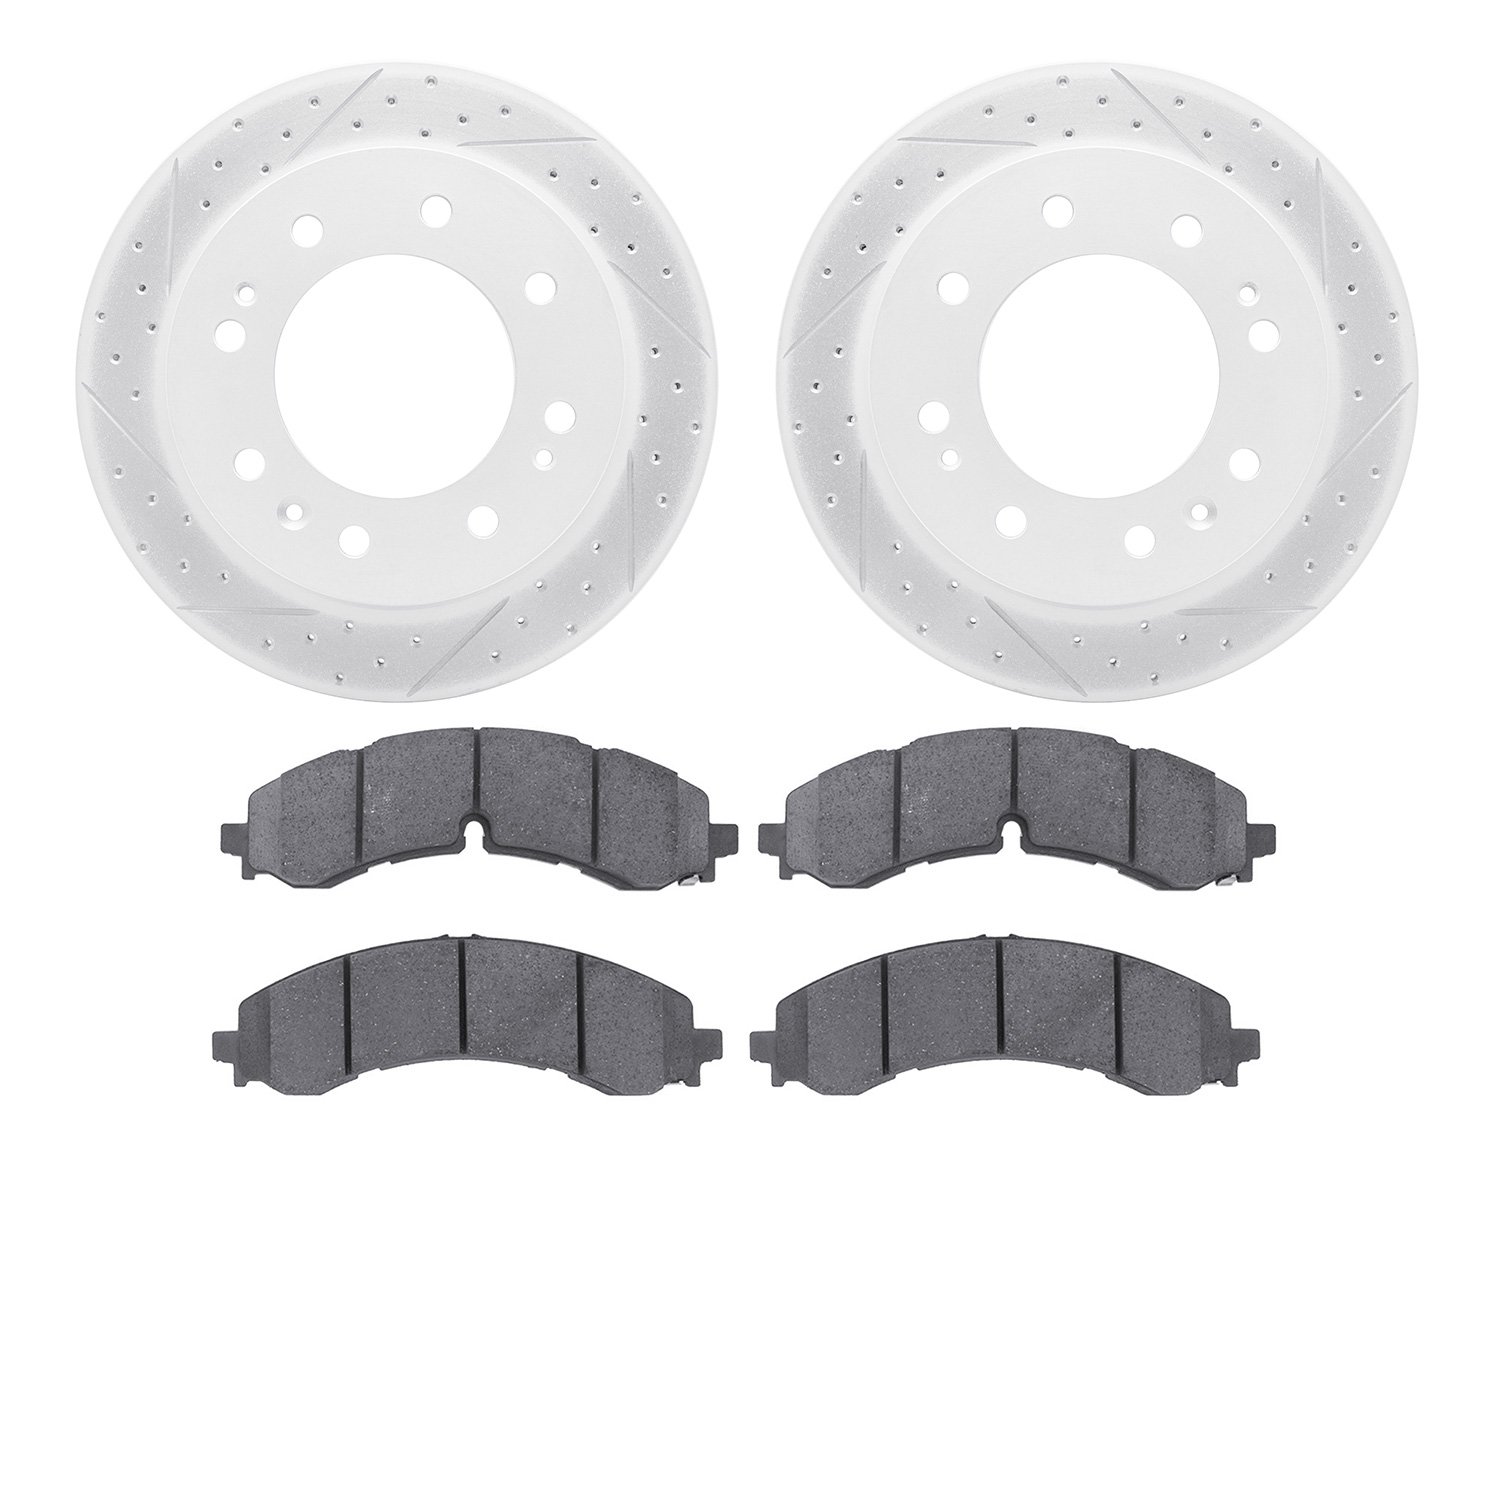 2502-48051 Geoperformance Drilled/Slotted Rotors w/5000 Advanced Brake Pads Kit, Fits Select GM, Position: Front